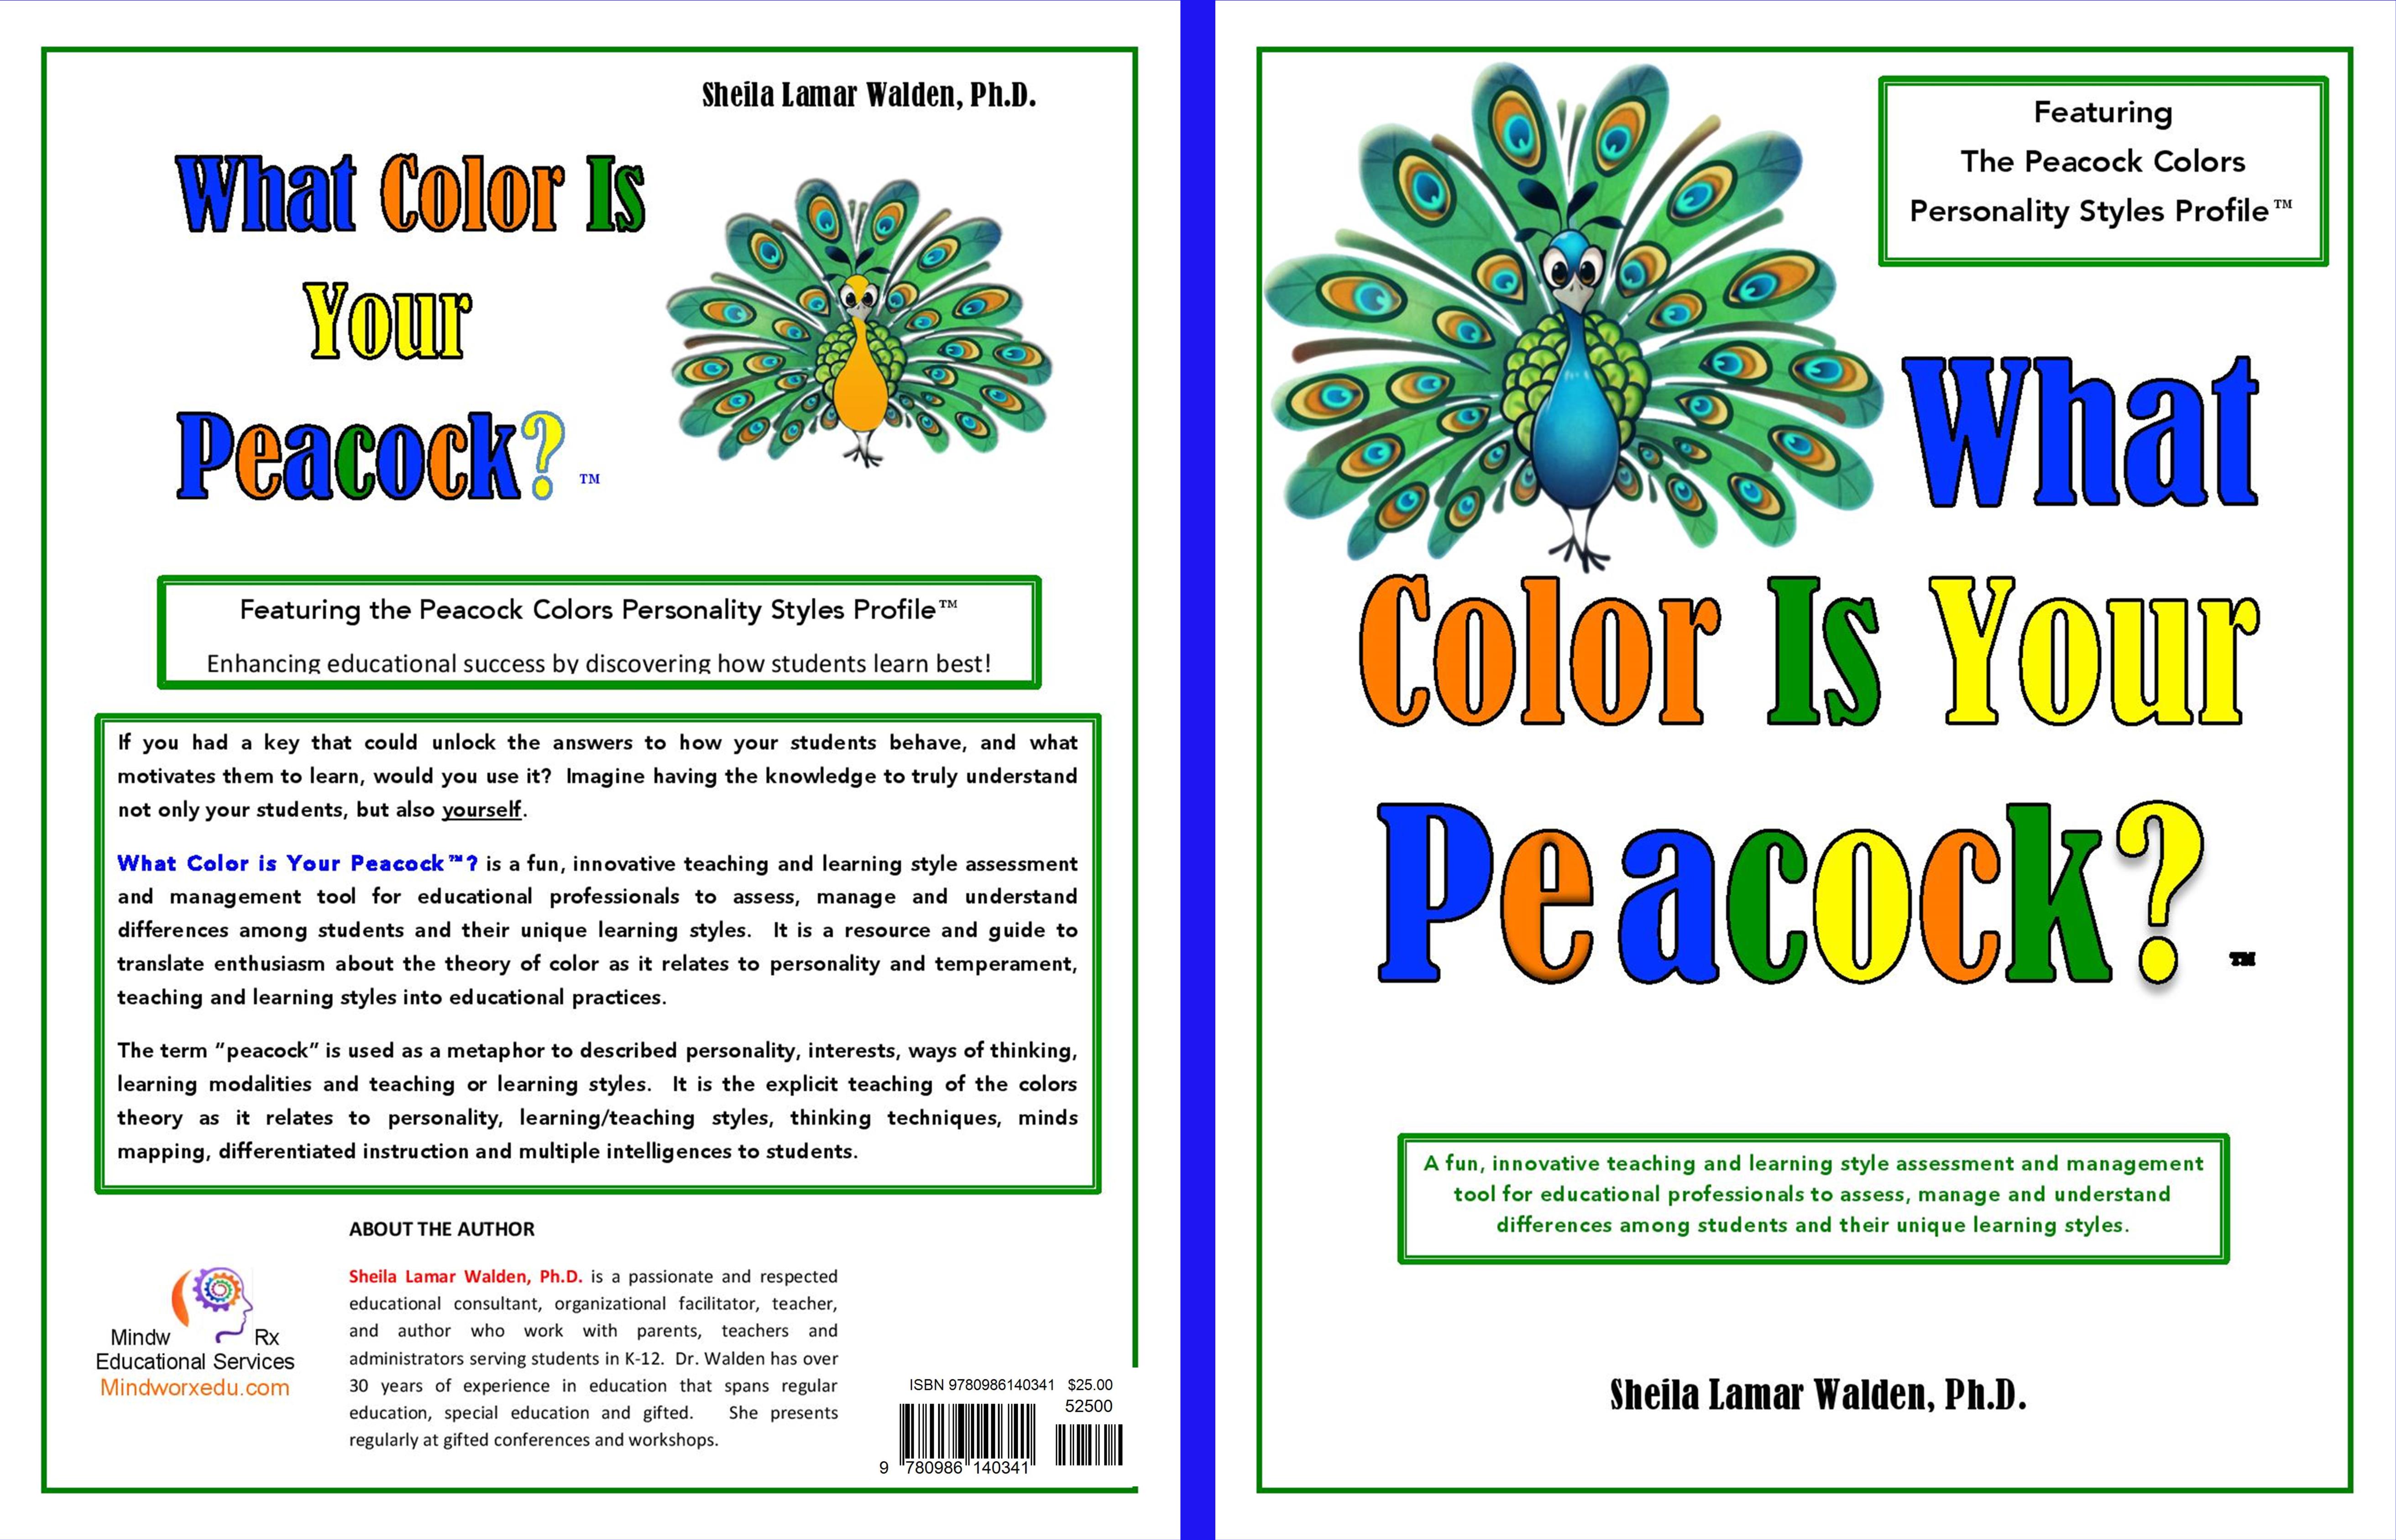 What Color Is Your Peacock? cover image